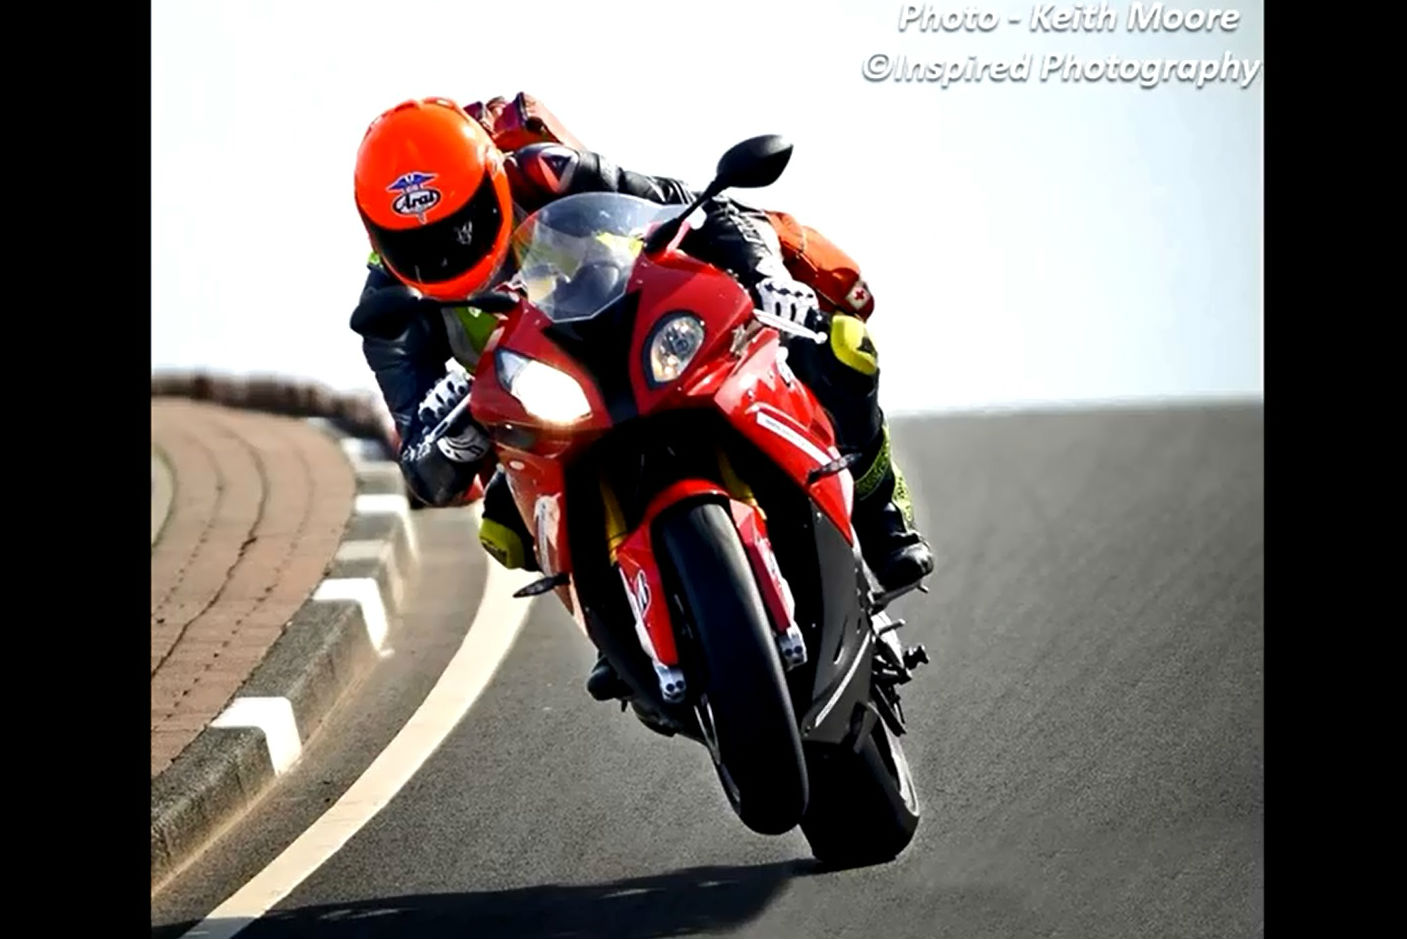 'Flying doctor' John Hinds gives an illuminating talk about his work